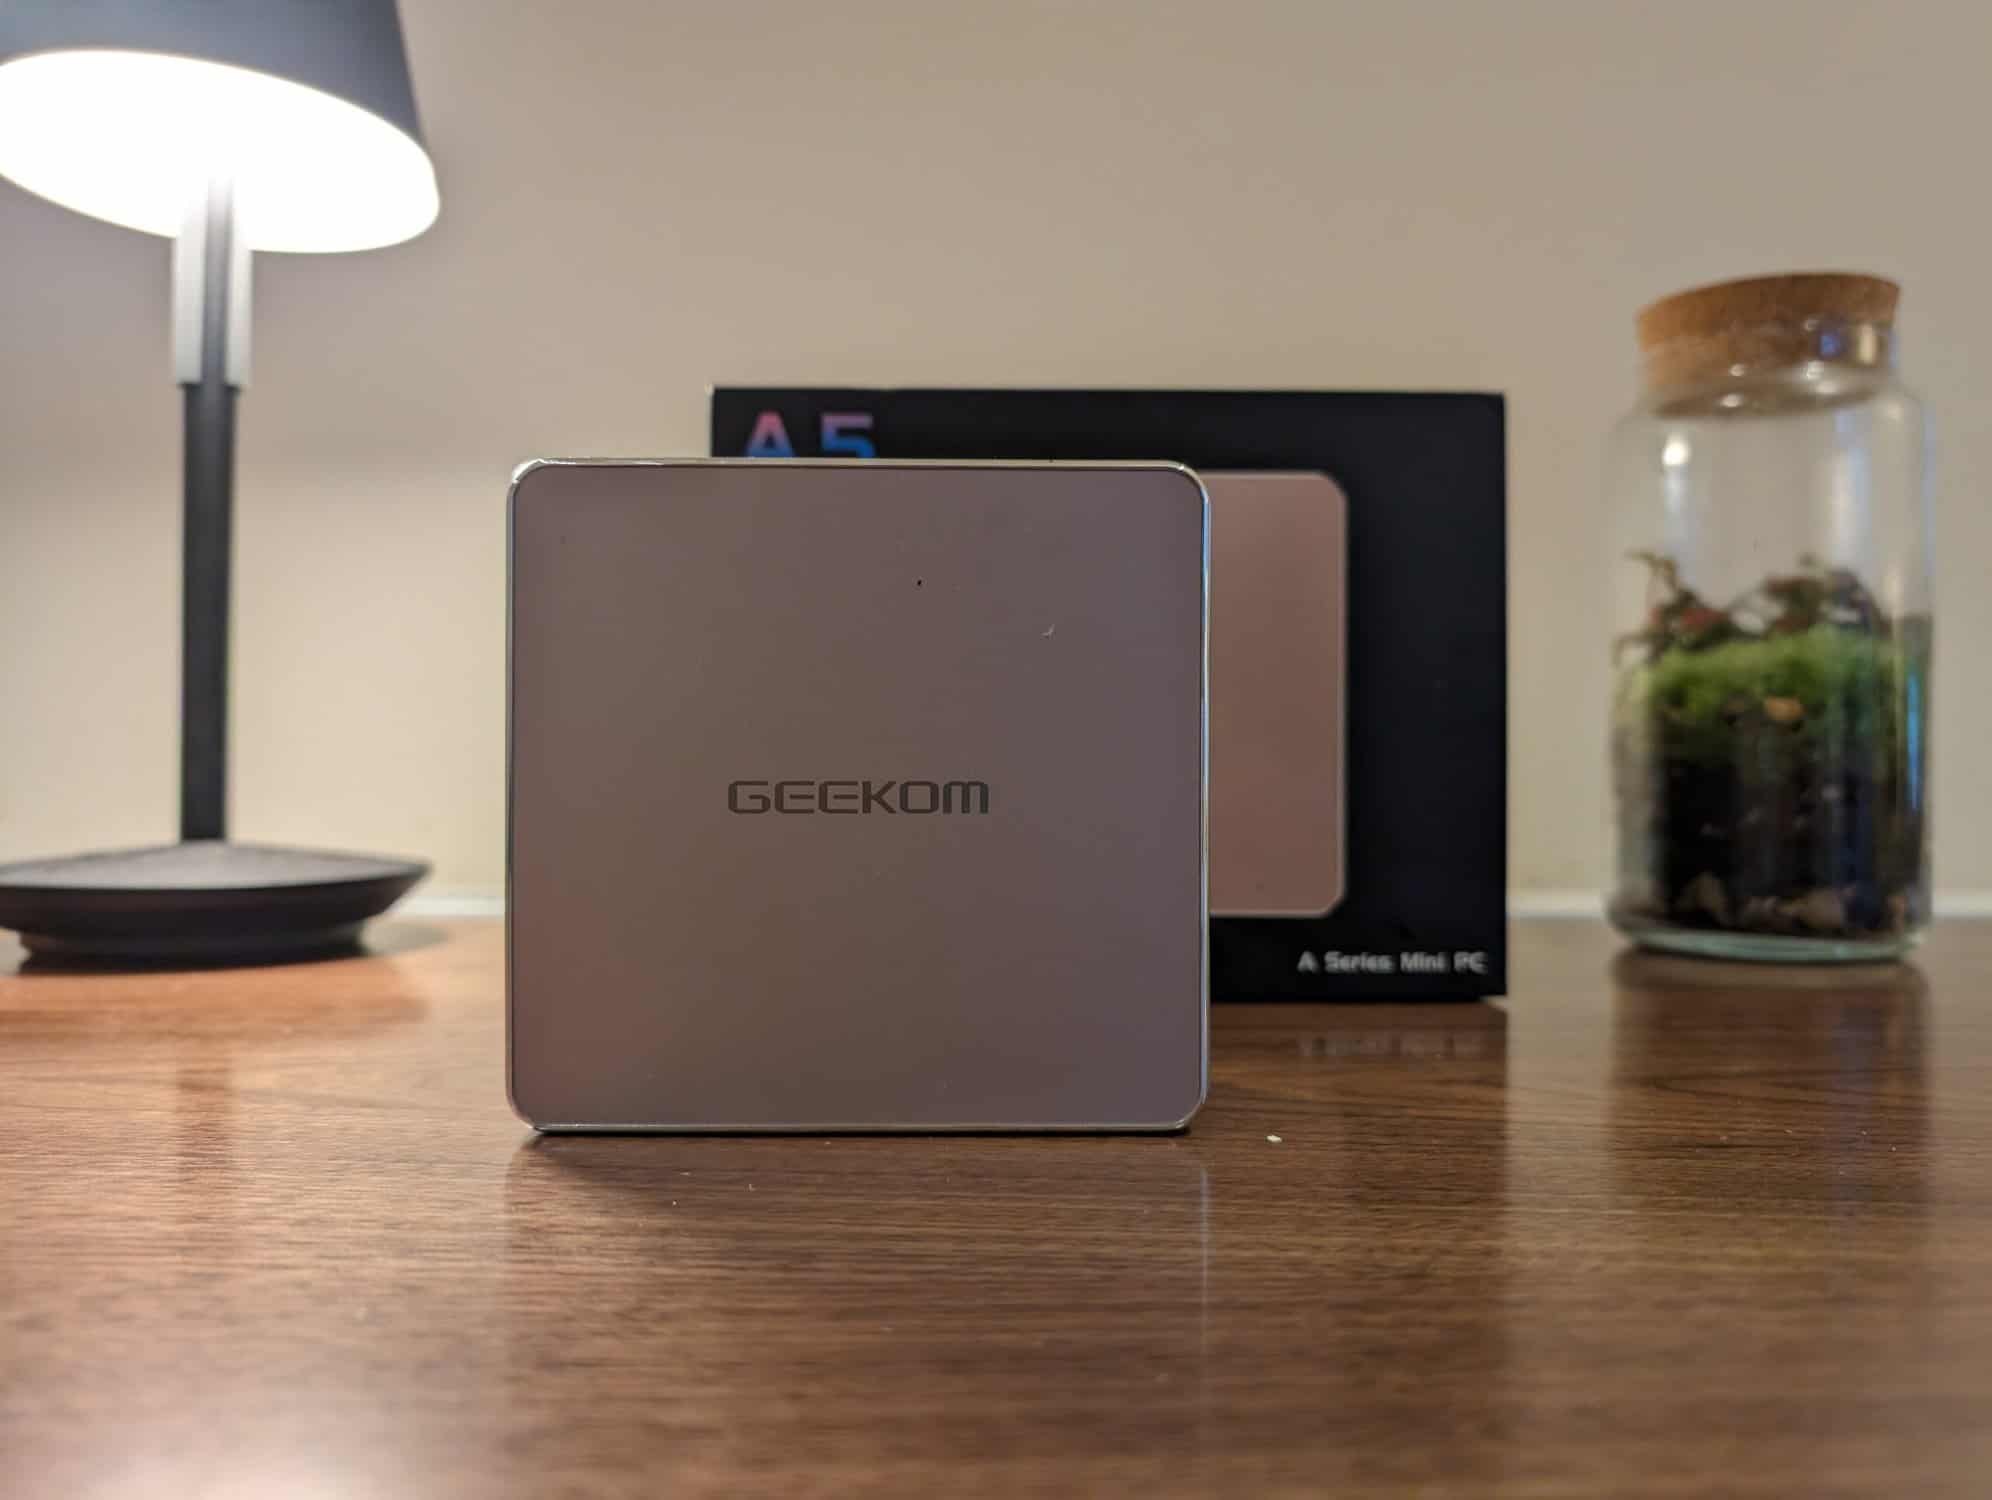 Geekom A5 Mini PC Review scaled